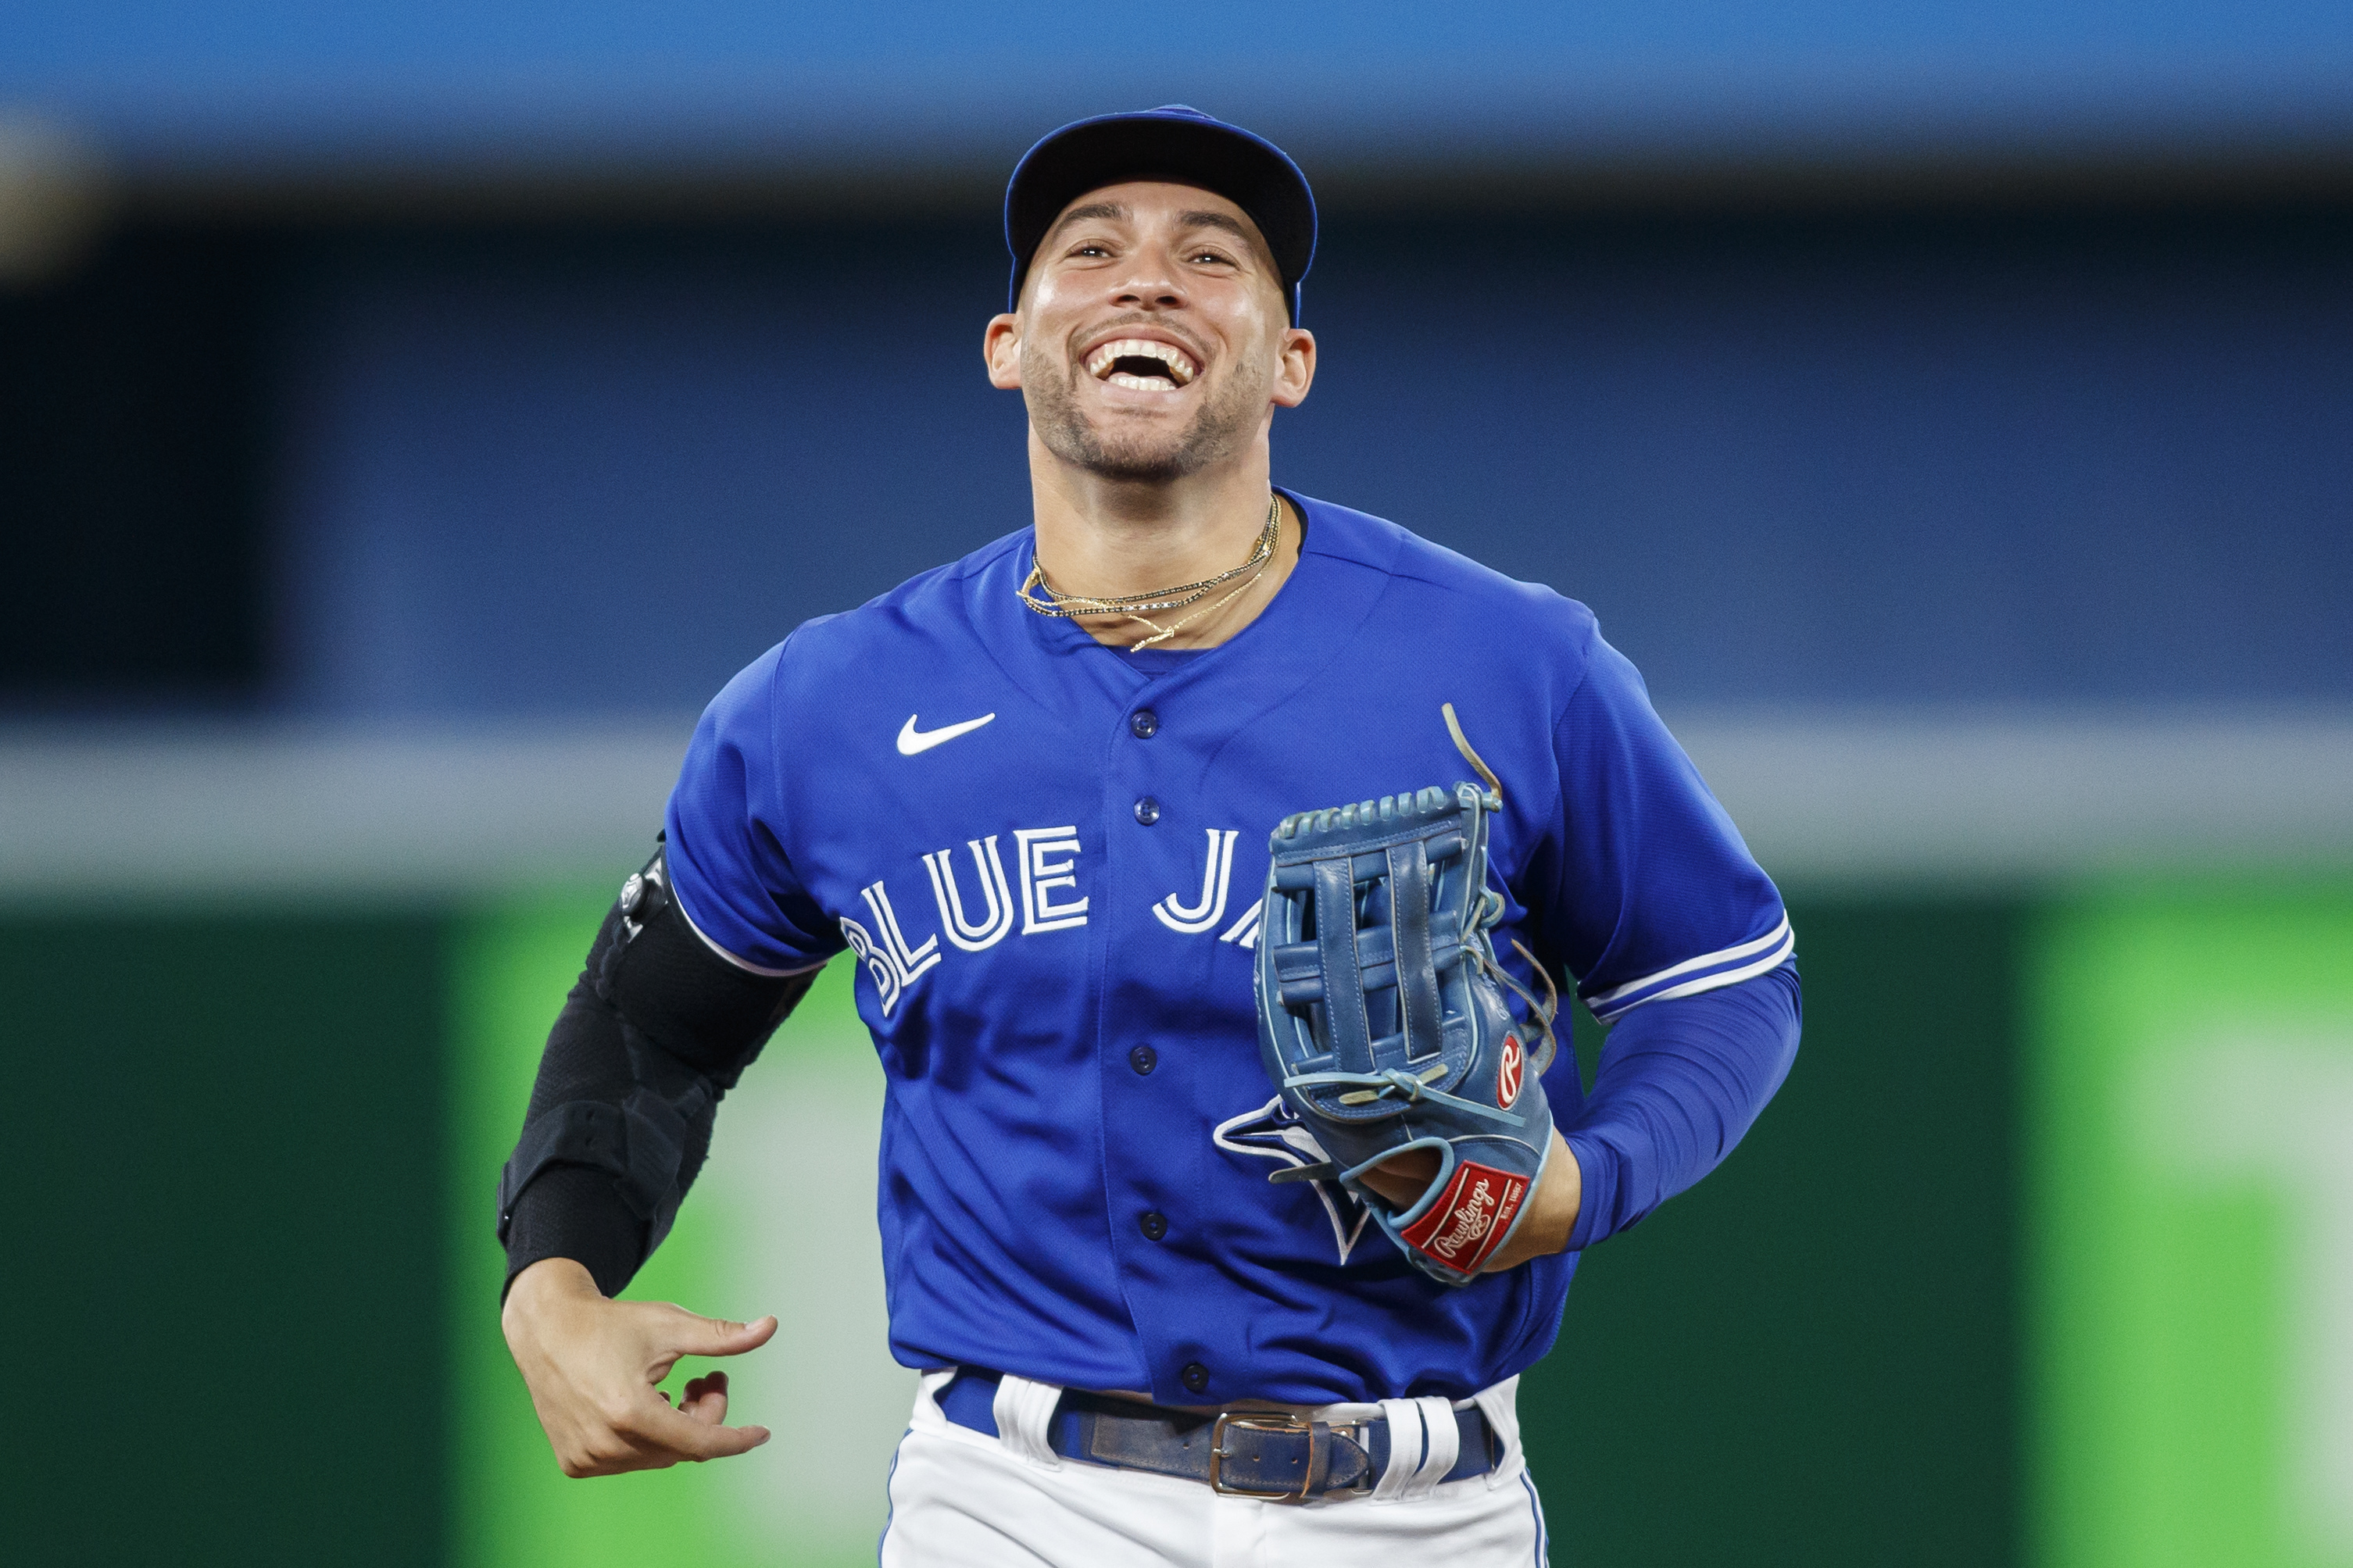 George Springer Religion: Is The Toronto Blue Jays Player